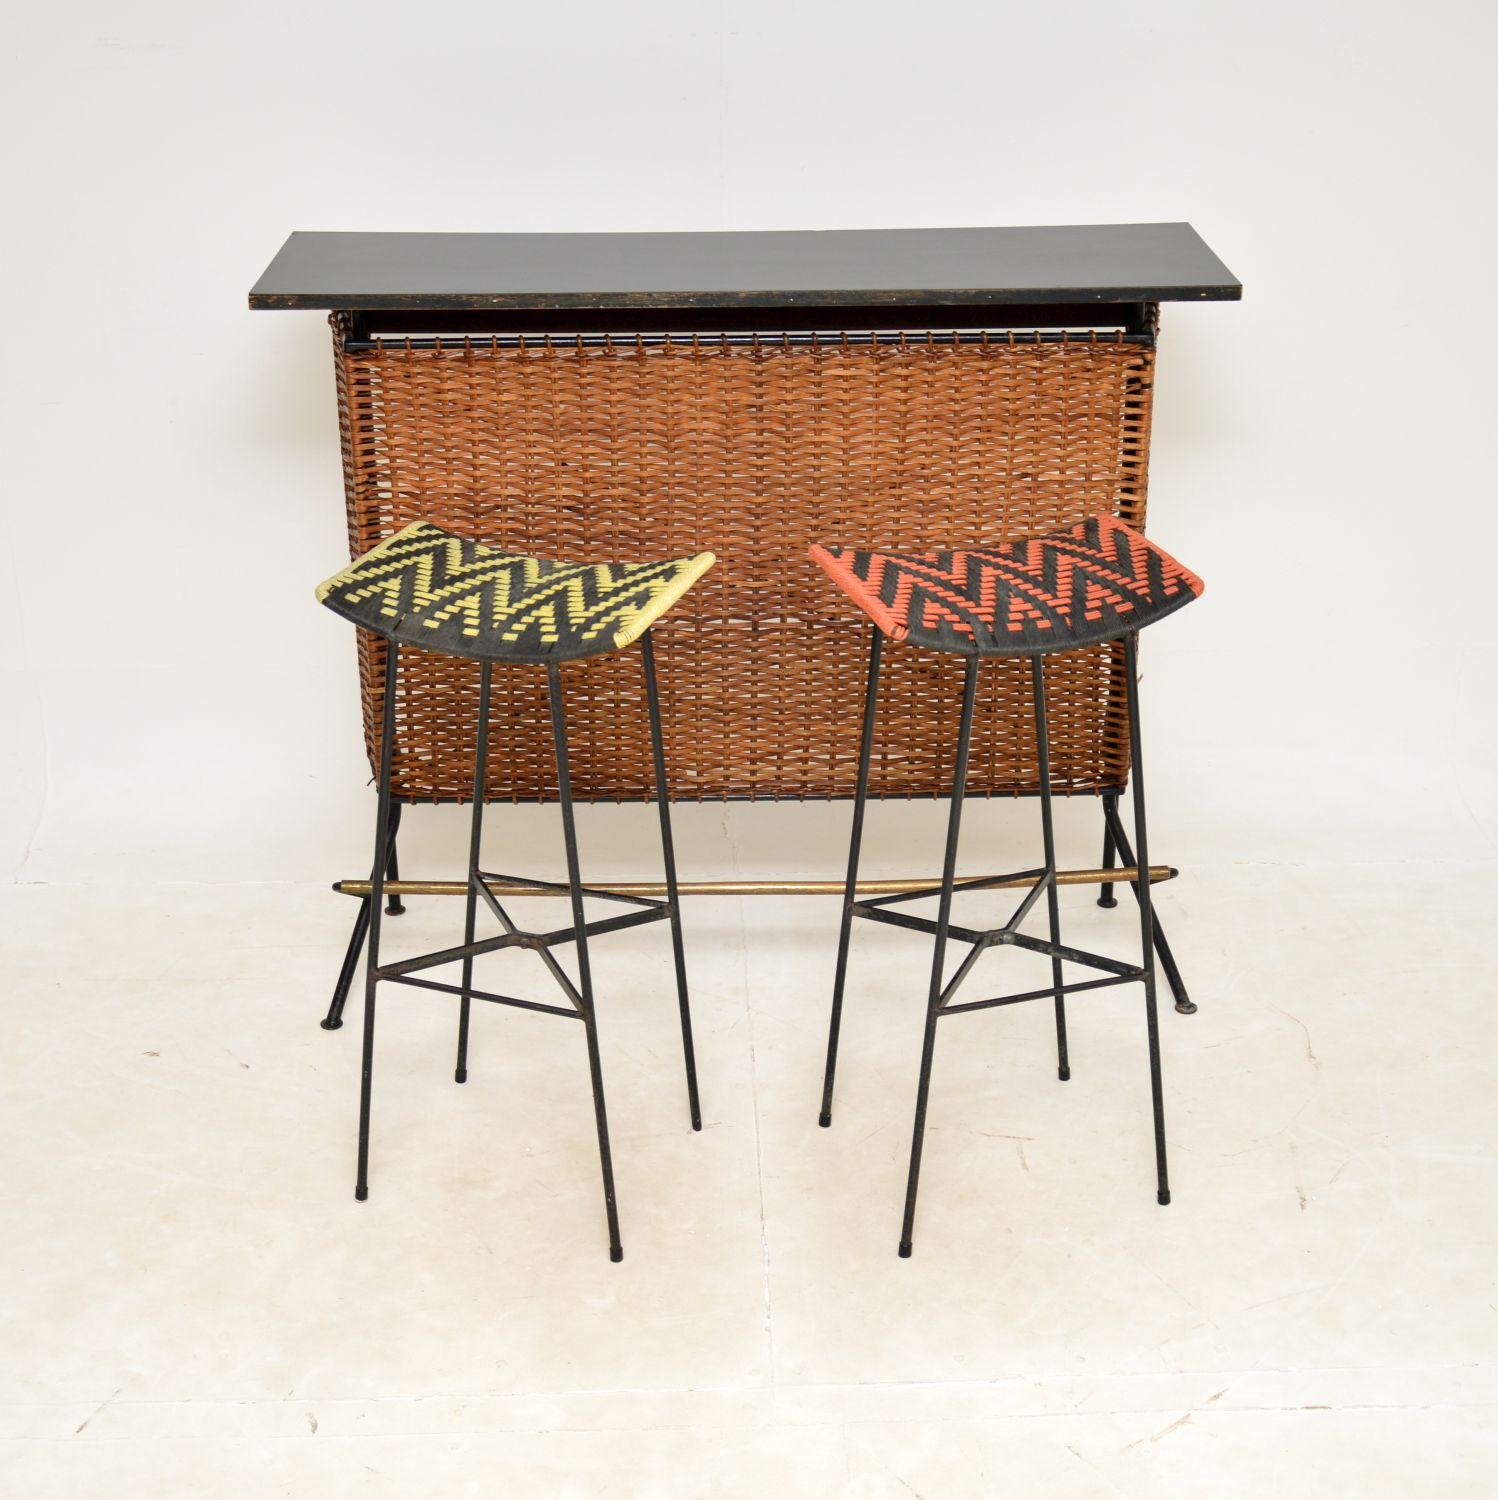 A very stylish and unusual vintage bar with two matching bar stools. This was made in England in the 1950-60’s.

It is extremely well made, the bar has a steel frame with woven rattan around the front and sides. The top is black formica, and there